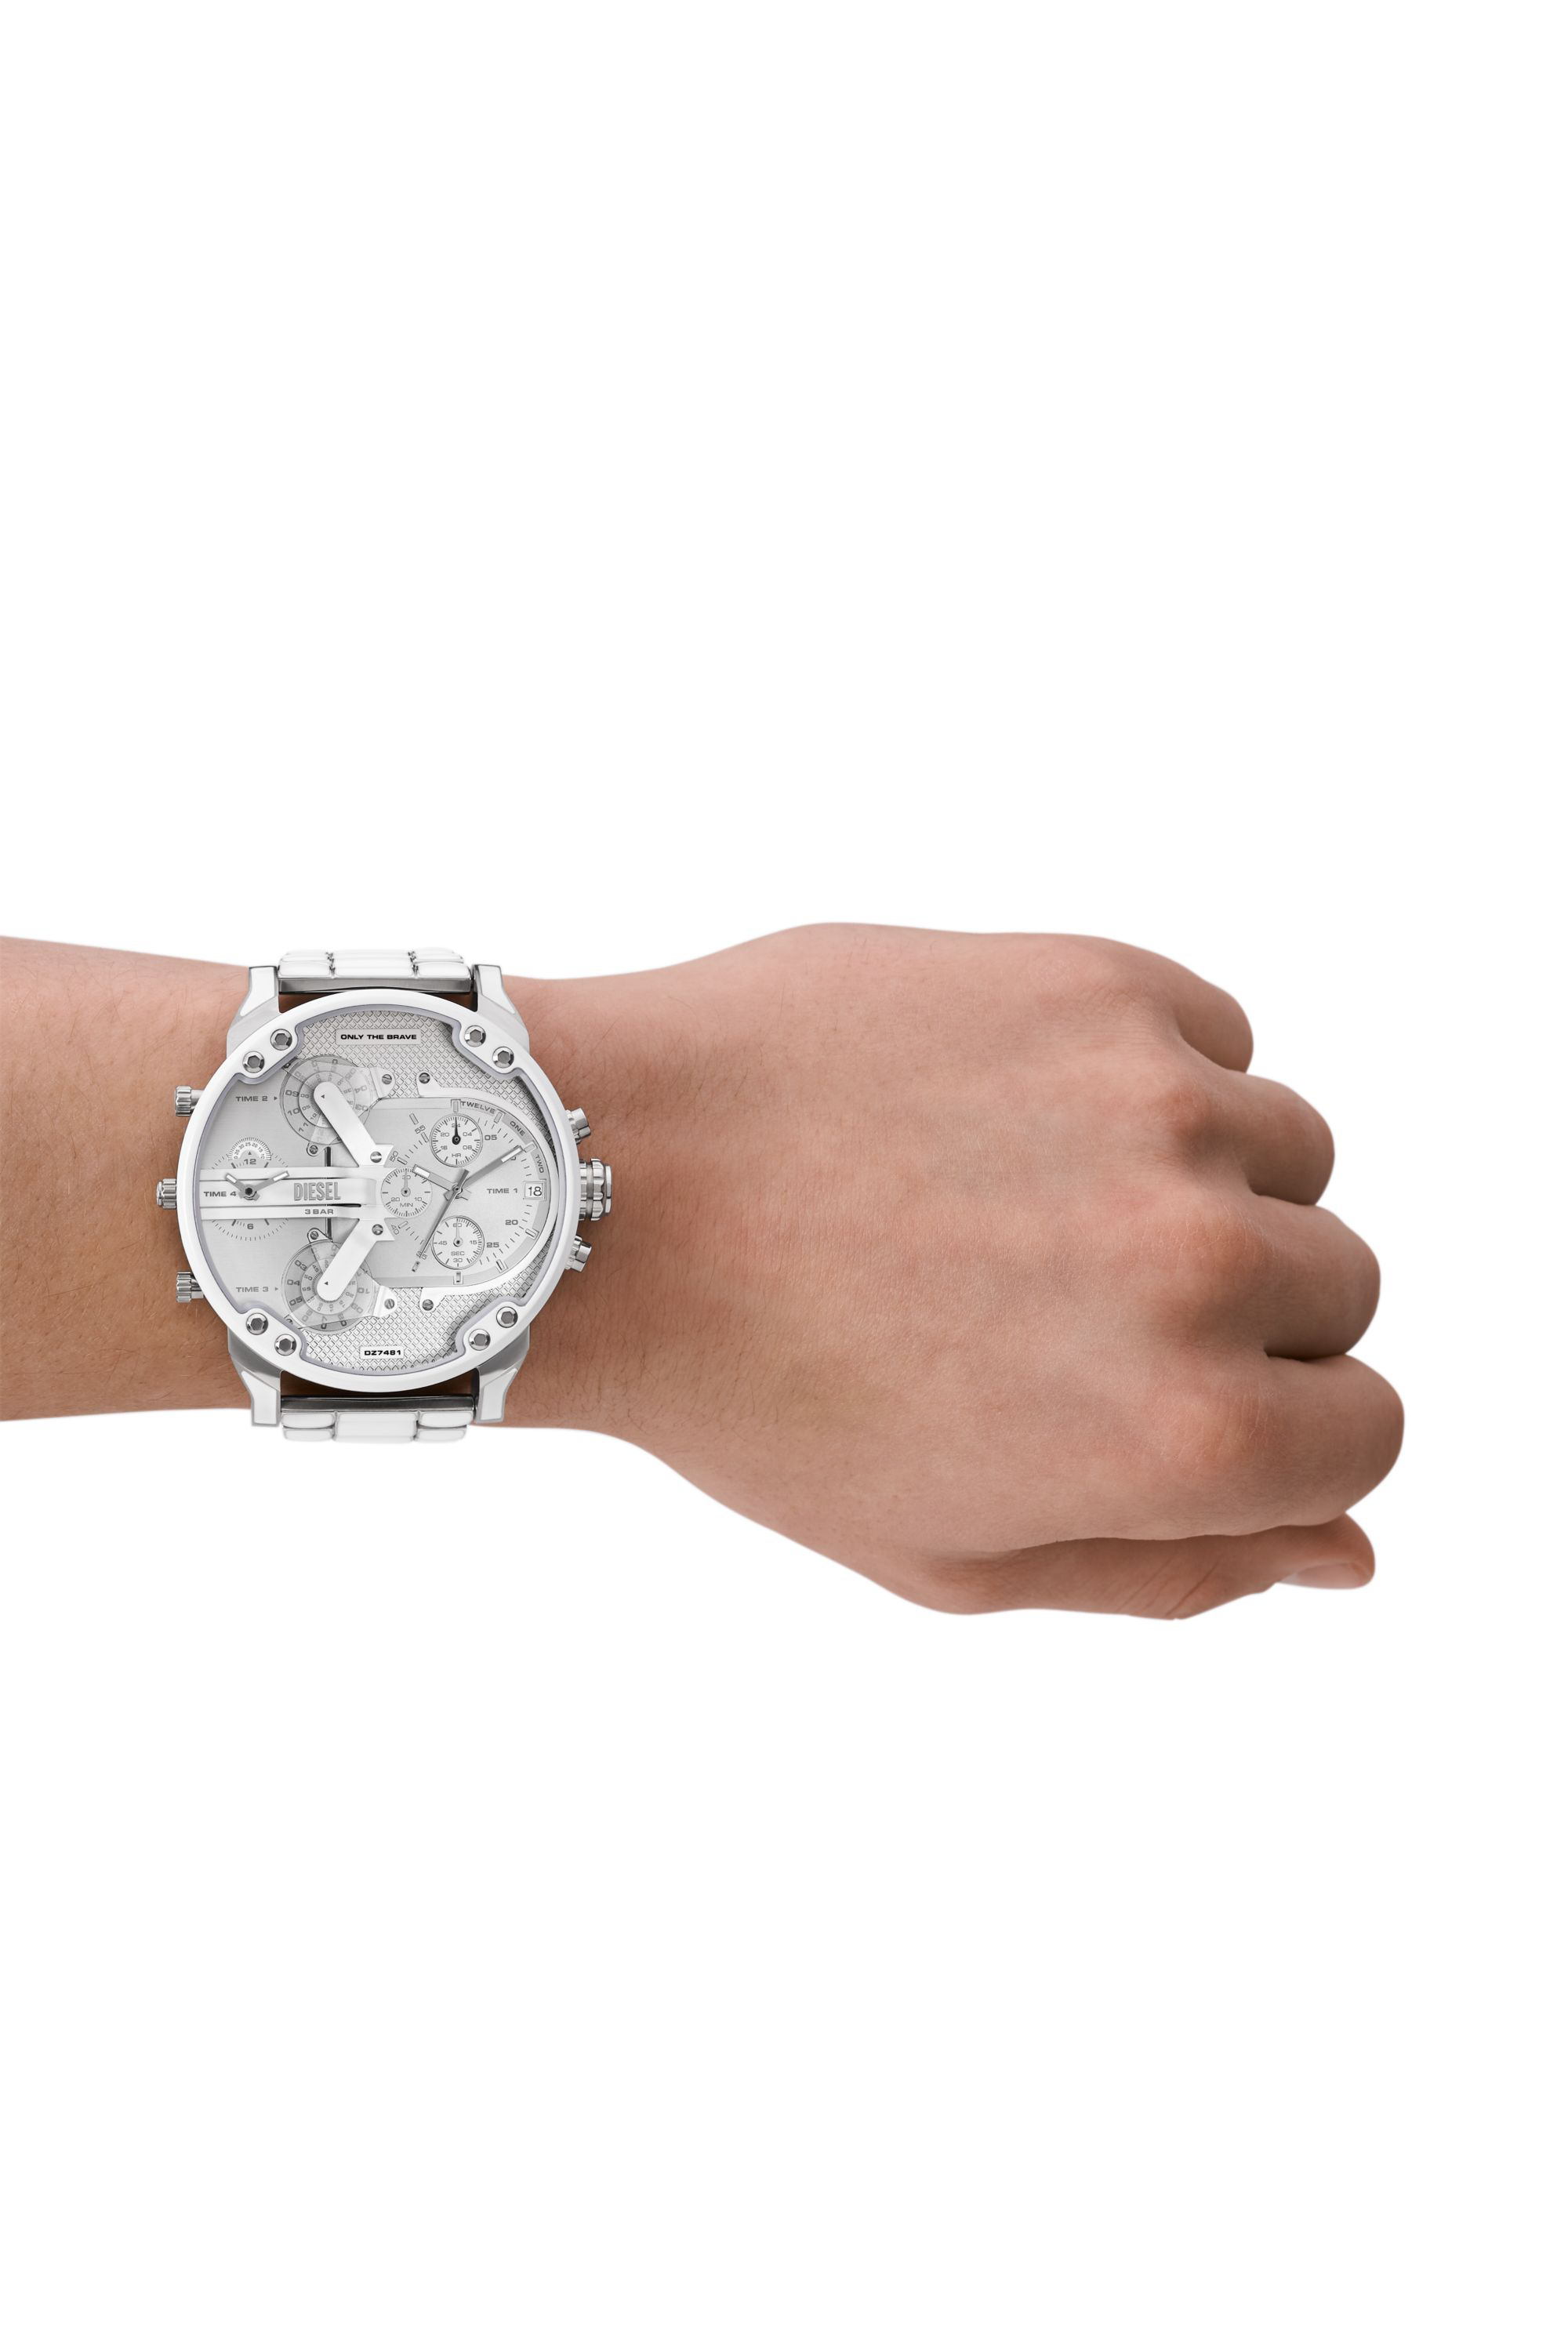 DZ7481 Mr. Daddy 2.0 white and stainless steel watch｜メンズ 